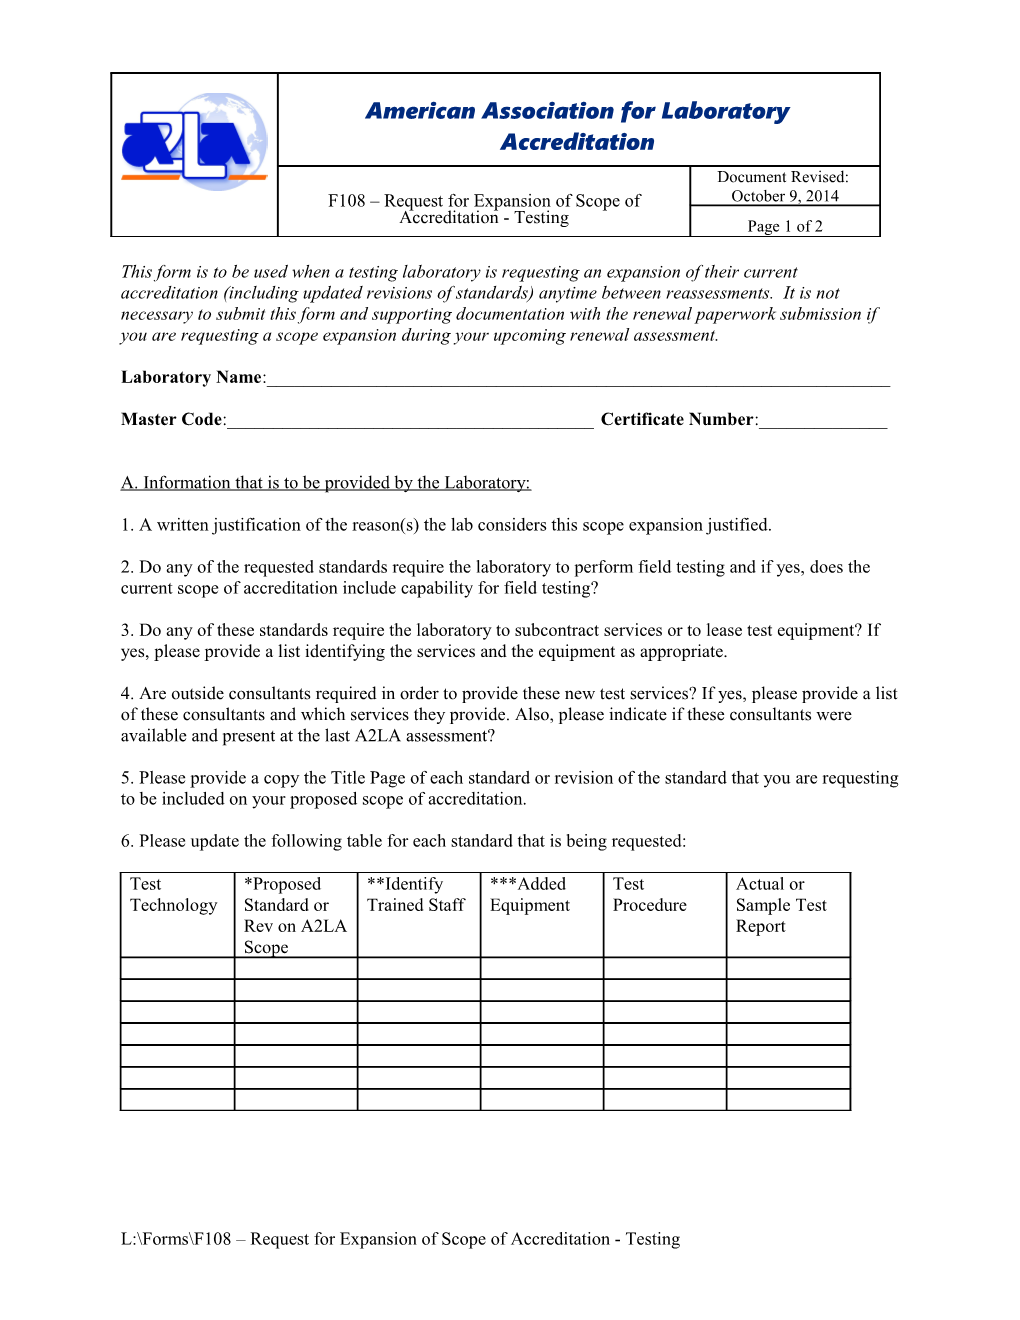 This Form Is to Be Used When a Testing Laboratory Is Requesting an Expansionof Their Current